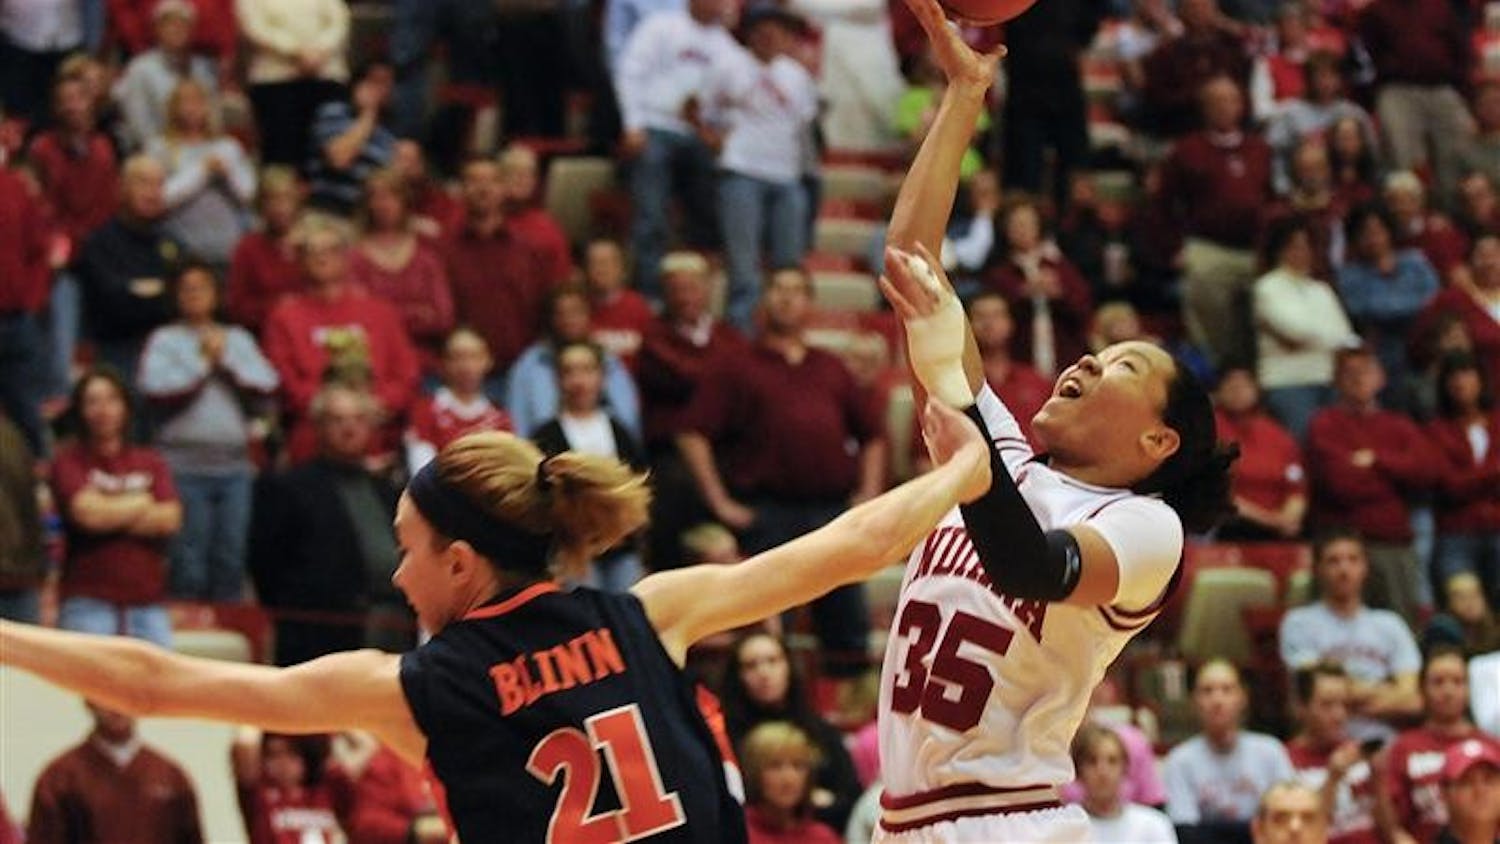 Illinois guard Macie Blinn fouls IU guard Kim Roberson during the second half of IU's 66-59 loss Feb. 8 at Assembly Hall. Roberson had 11 points and nine rebounds.